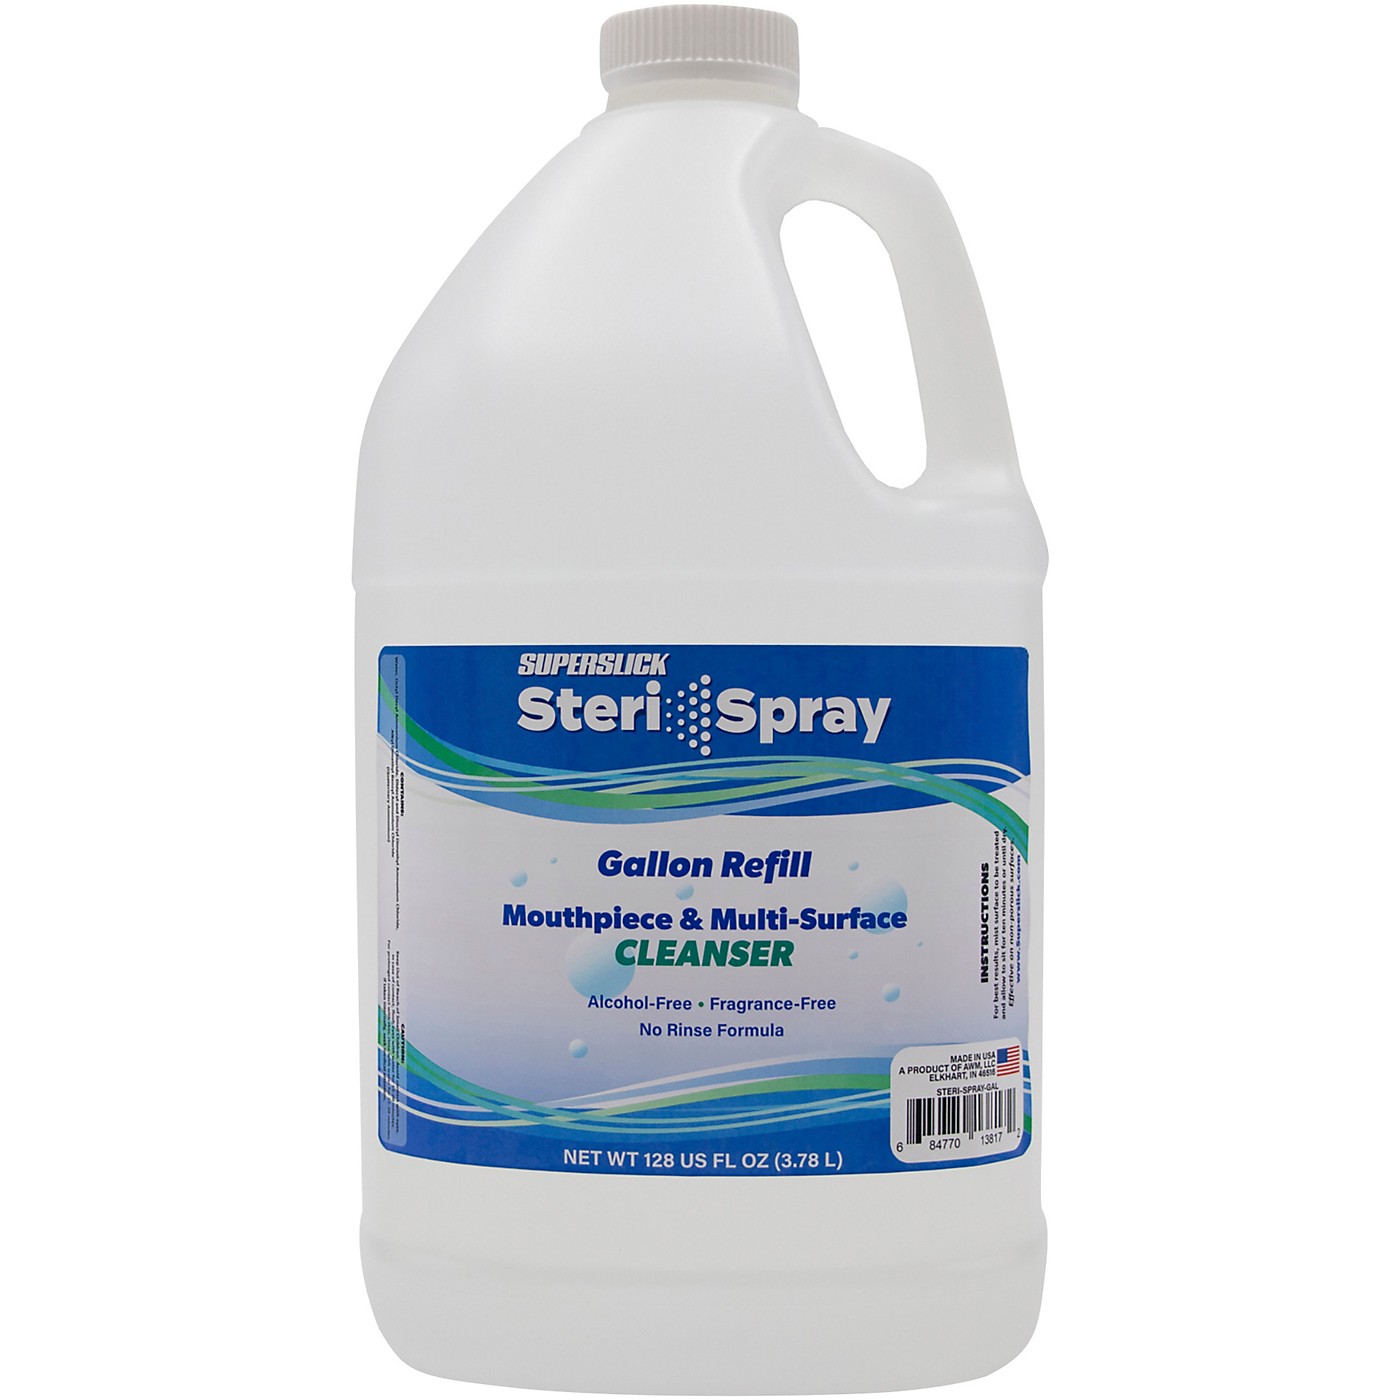 Superslick Steri-Spray Mouthpiece & Multi-Surface Cleanser Refill, 128 oz. (3.79 L) thumbnail